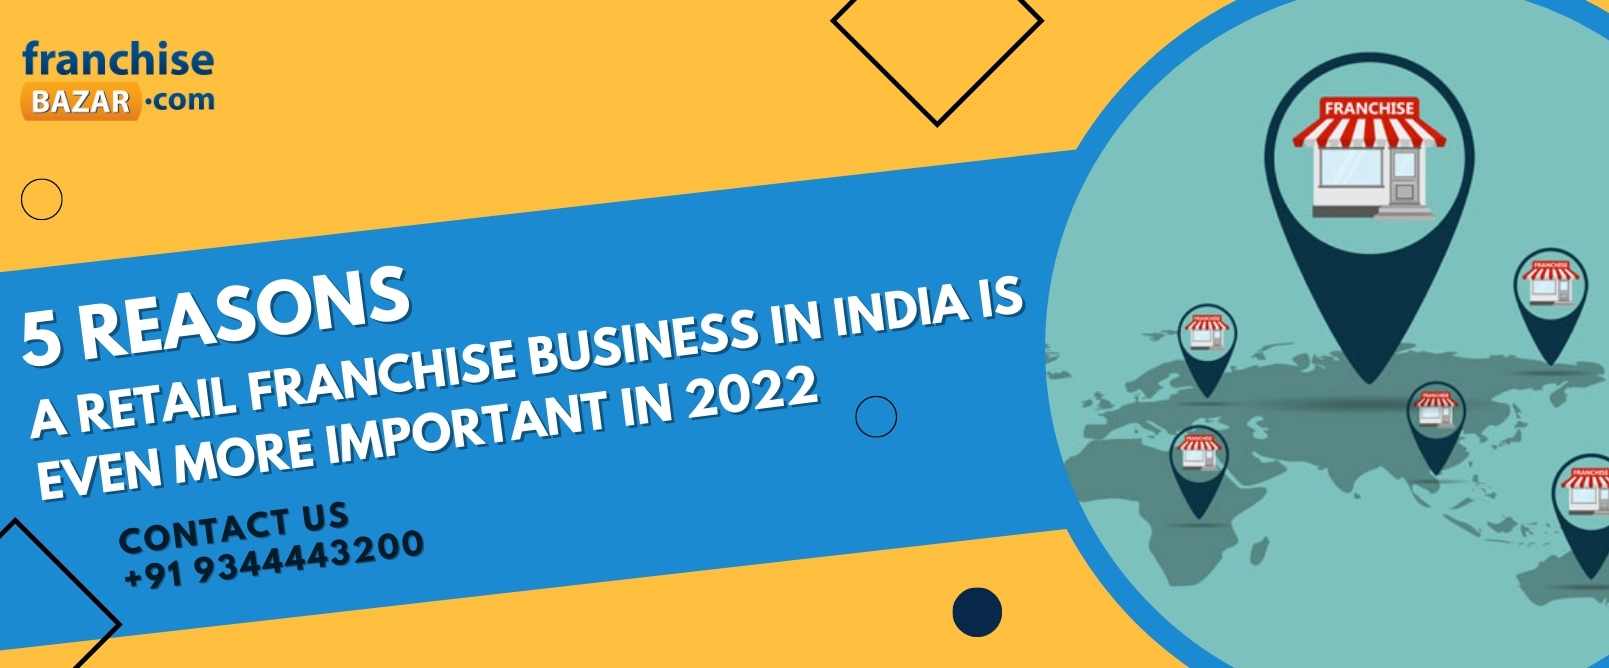 5 Reasons A Retail Franchise Business In India Is Even More Important In 2022	